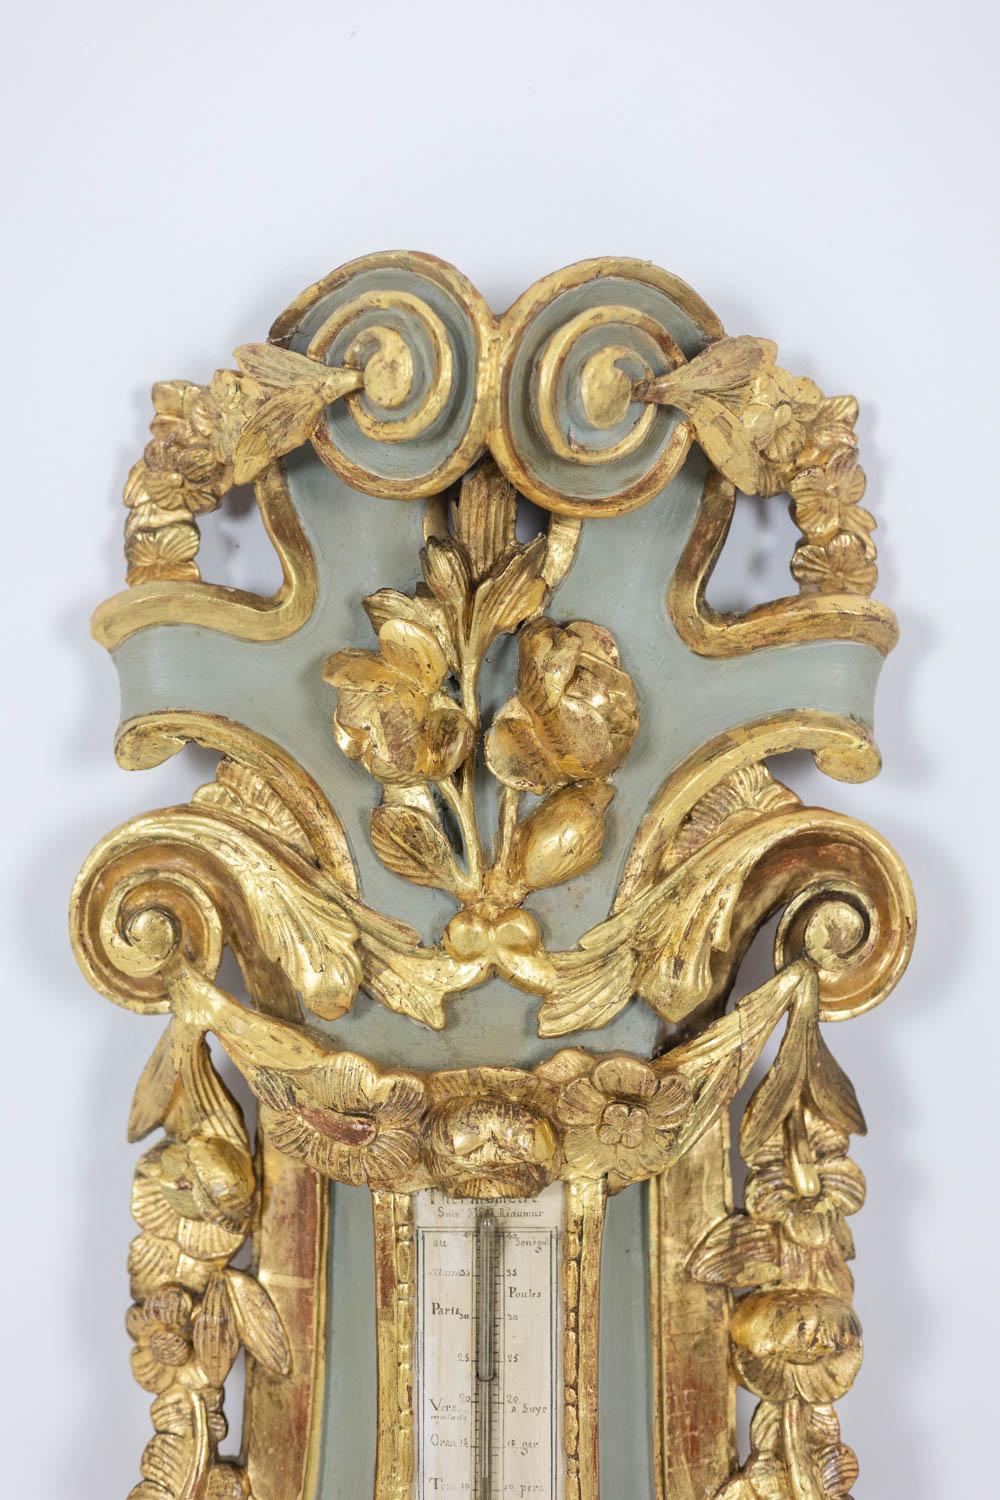 Cicery. Barometer in carved and gilded wood. 18th century period. 1